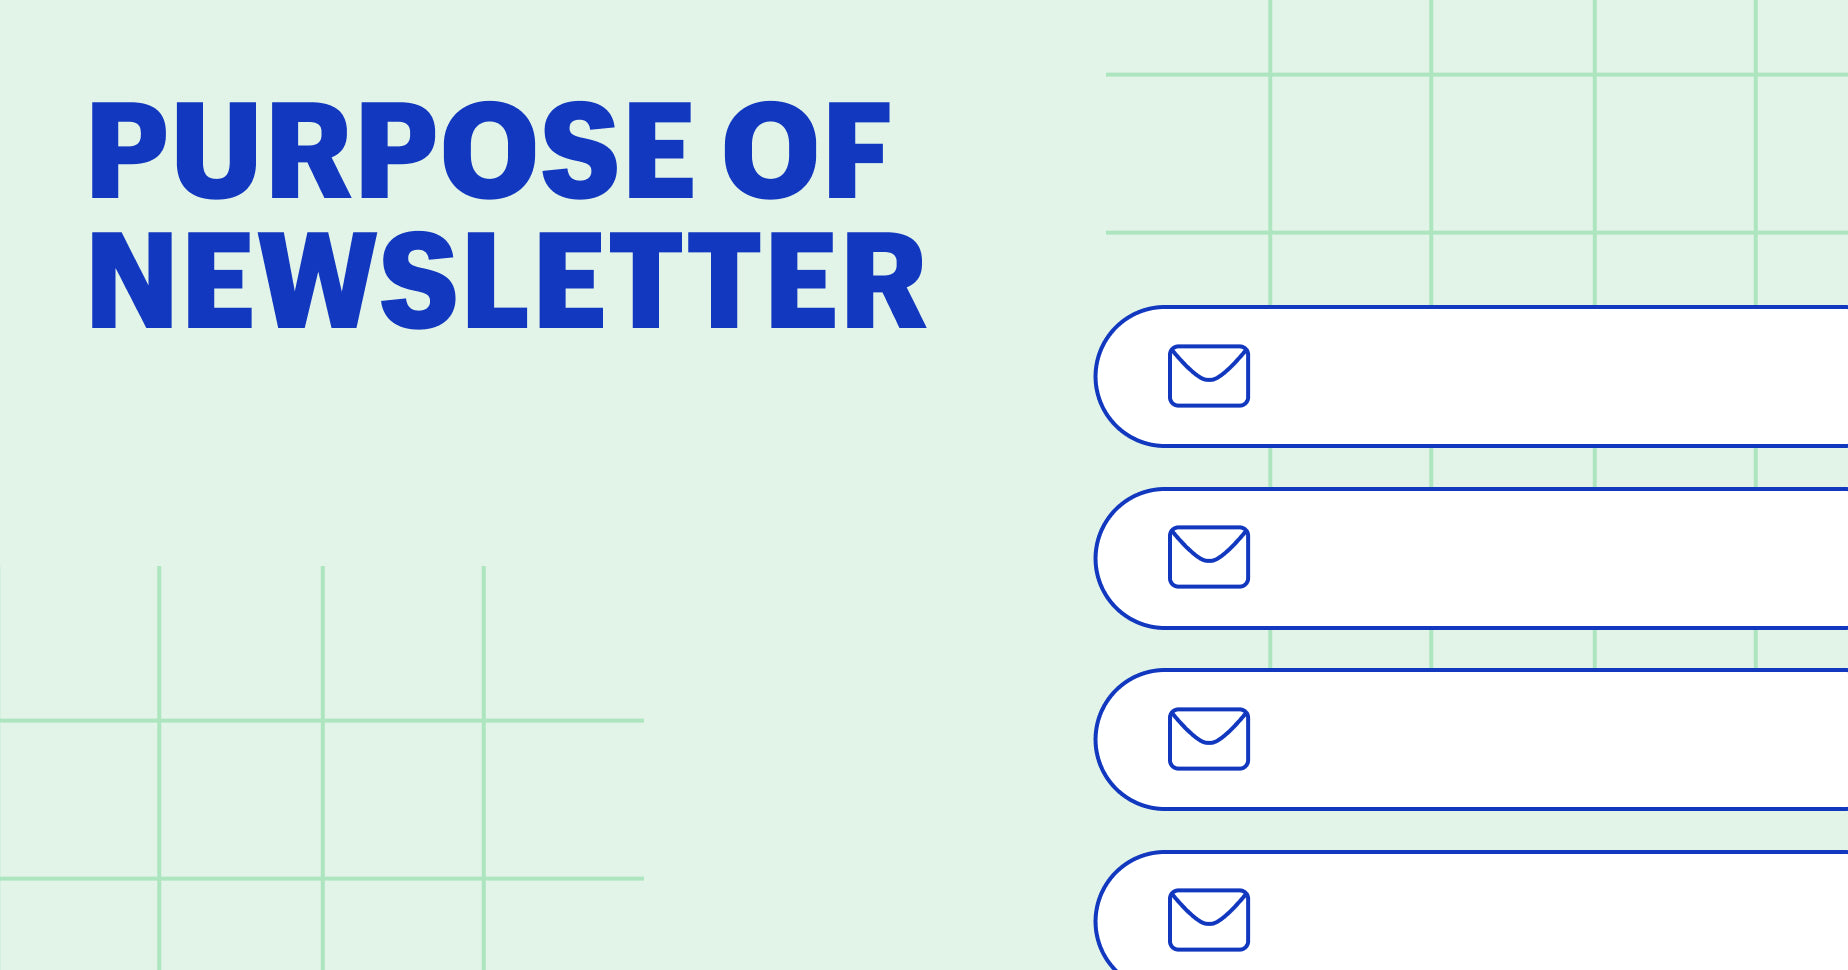 Light green background with dark blue text that says "purpose of newsletter" along with a vector diagram of an email inbox